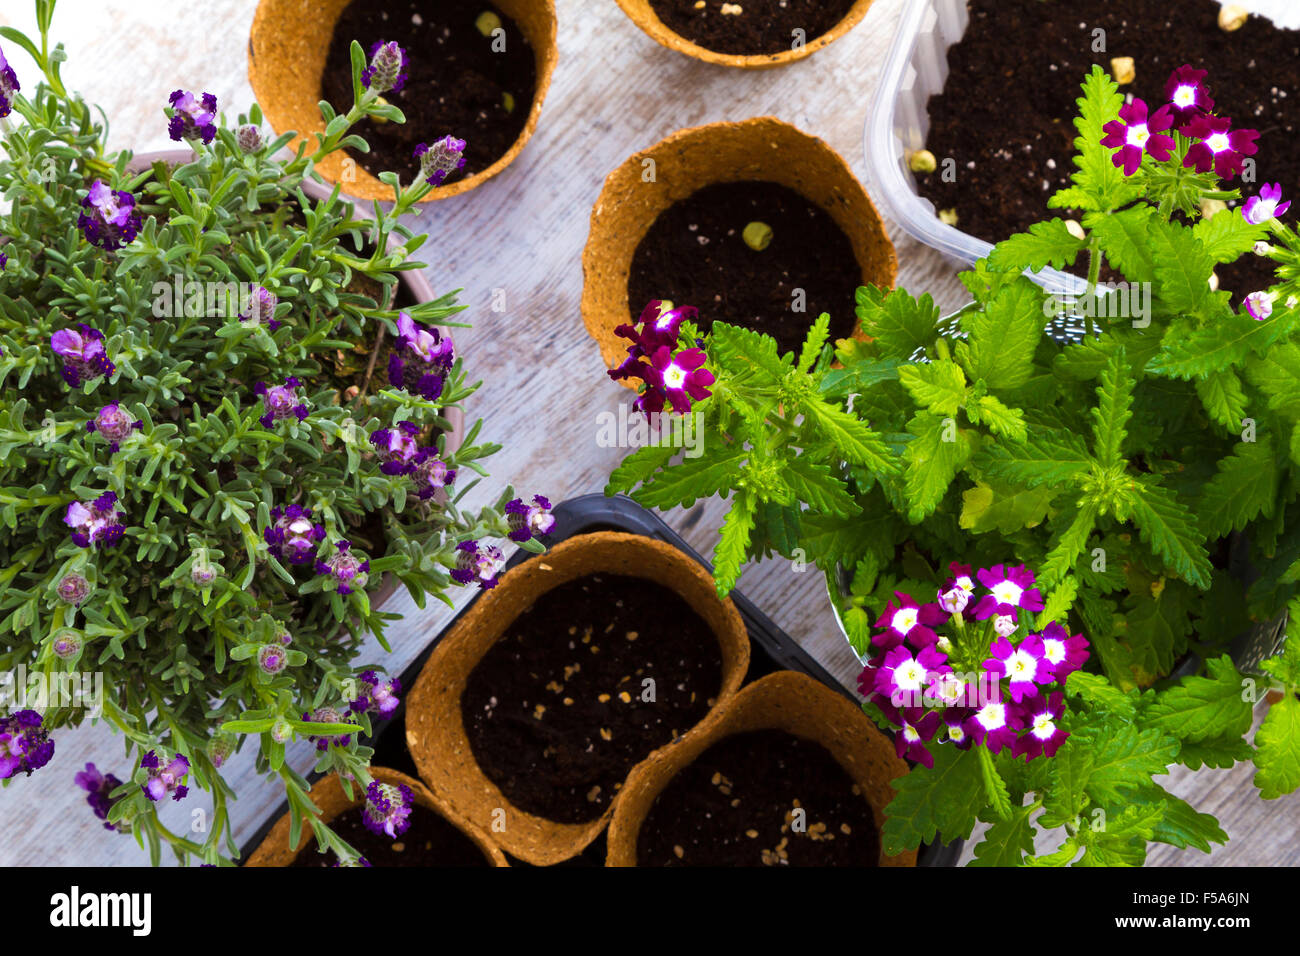 Planting flowers and vegetables at home Stock Photo